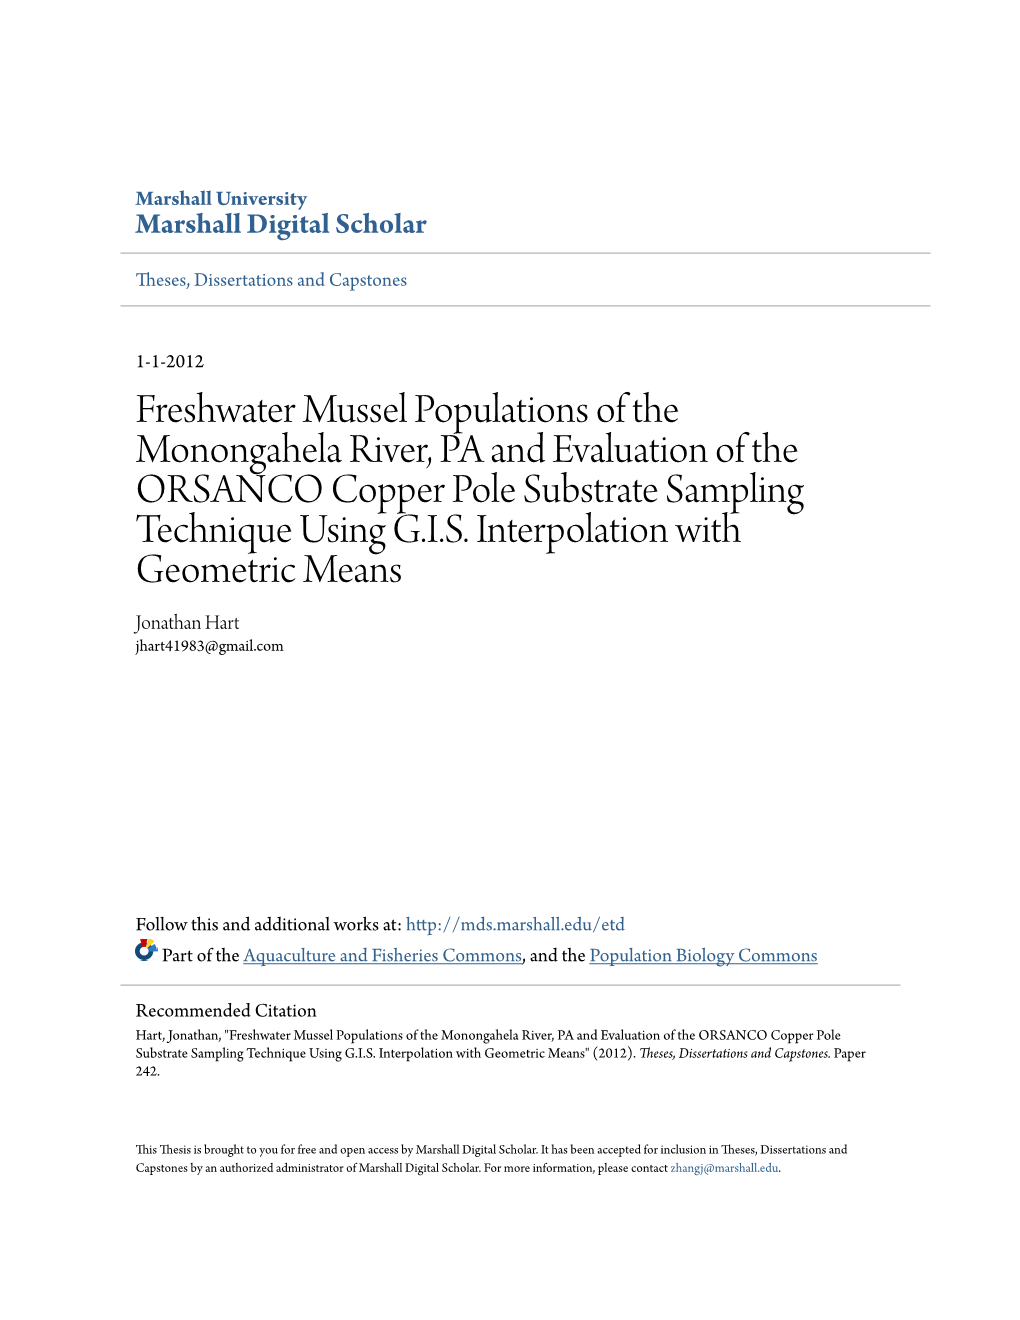 Freshwater Mussel Populations of the Monongahela River, PA and Evaluation of the ORSANCO Copper Pole Substrate Sampling Technique Using G.I.S